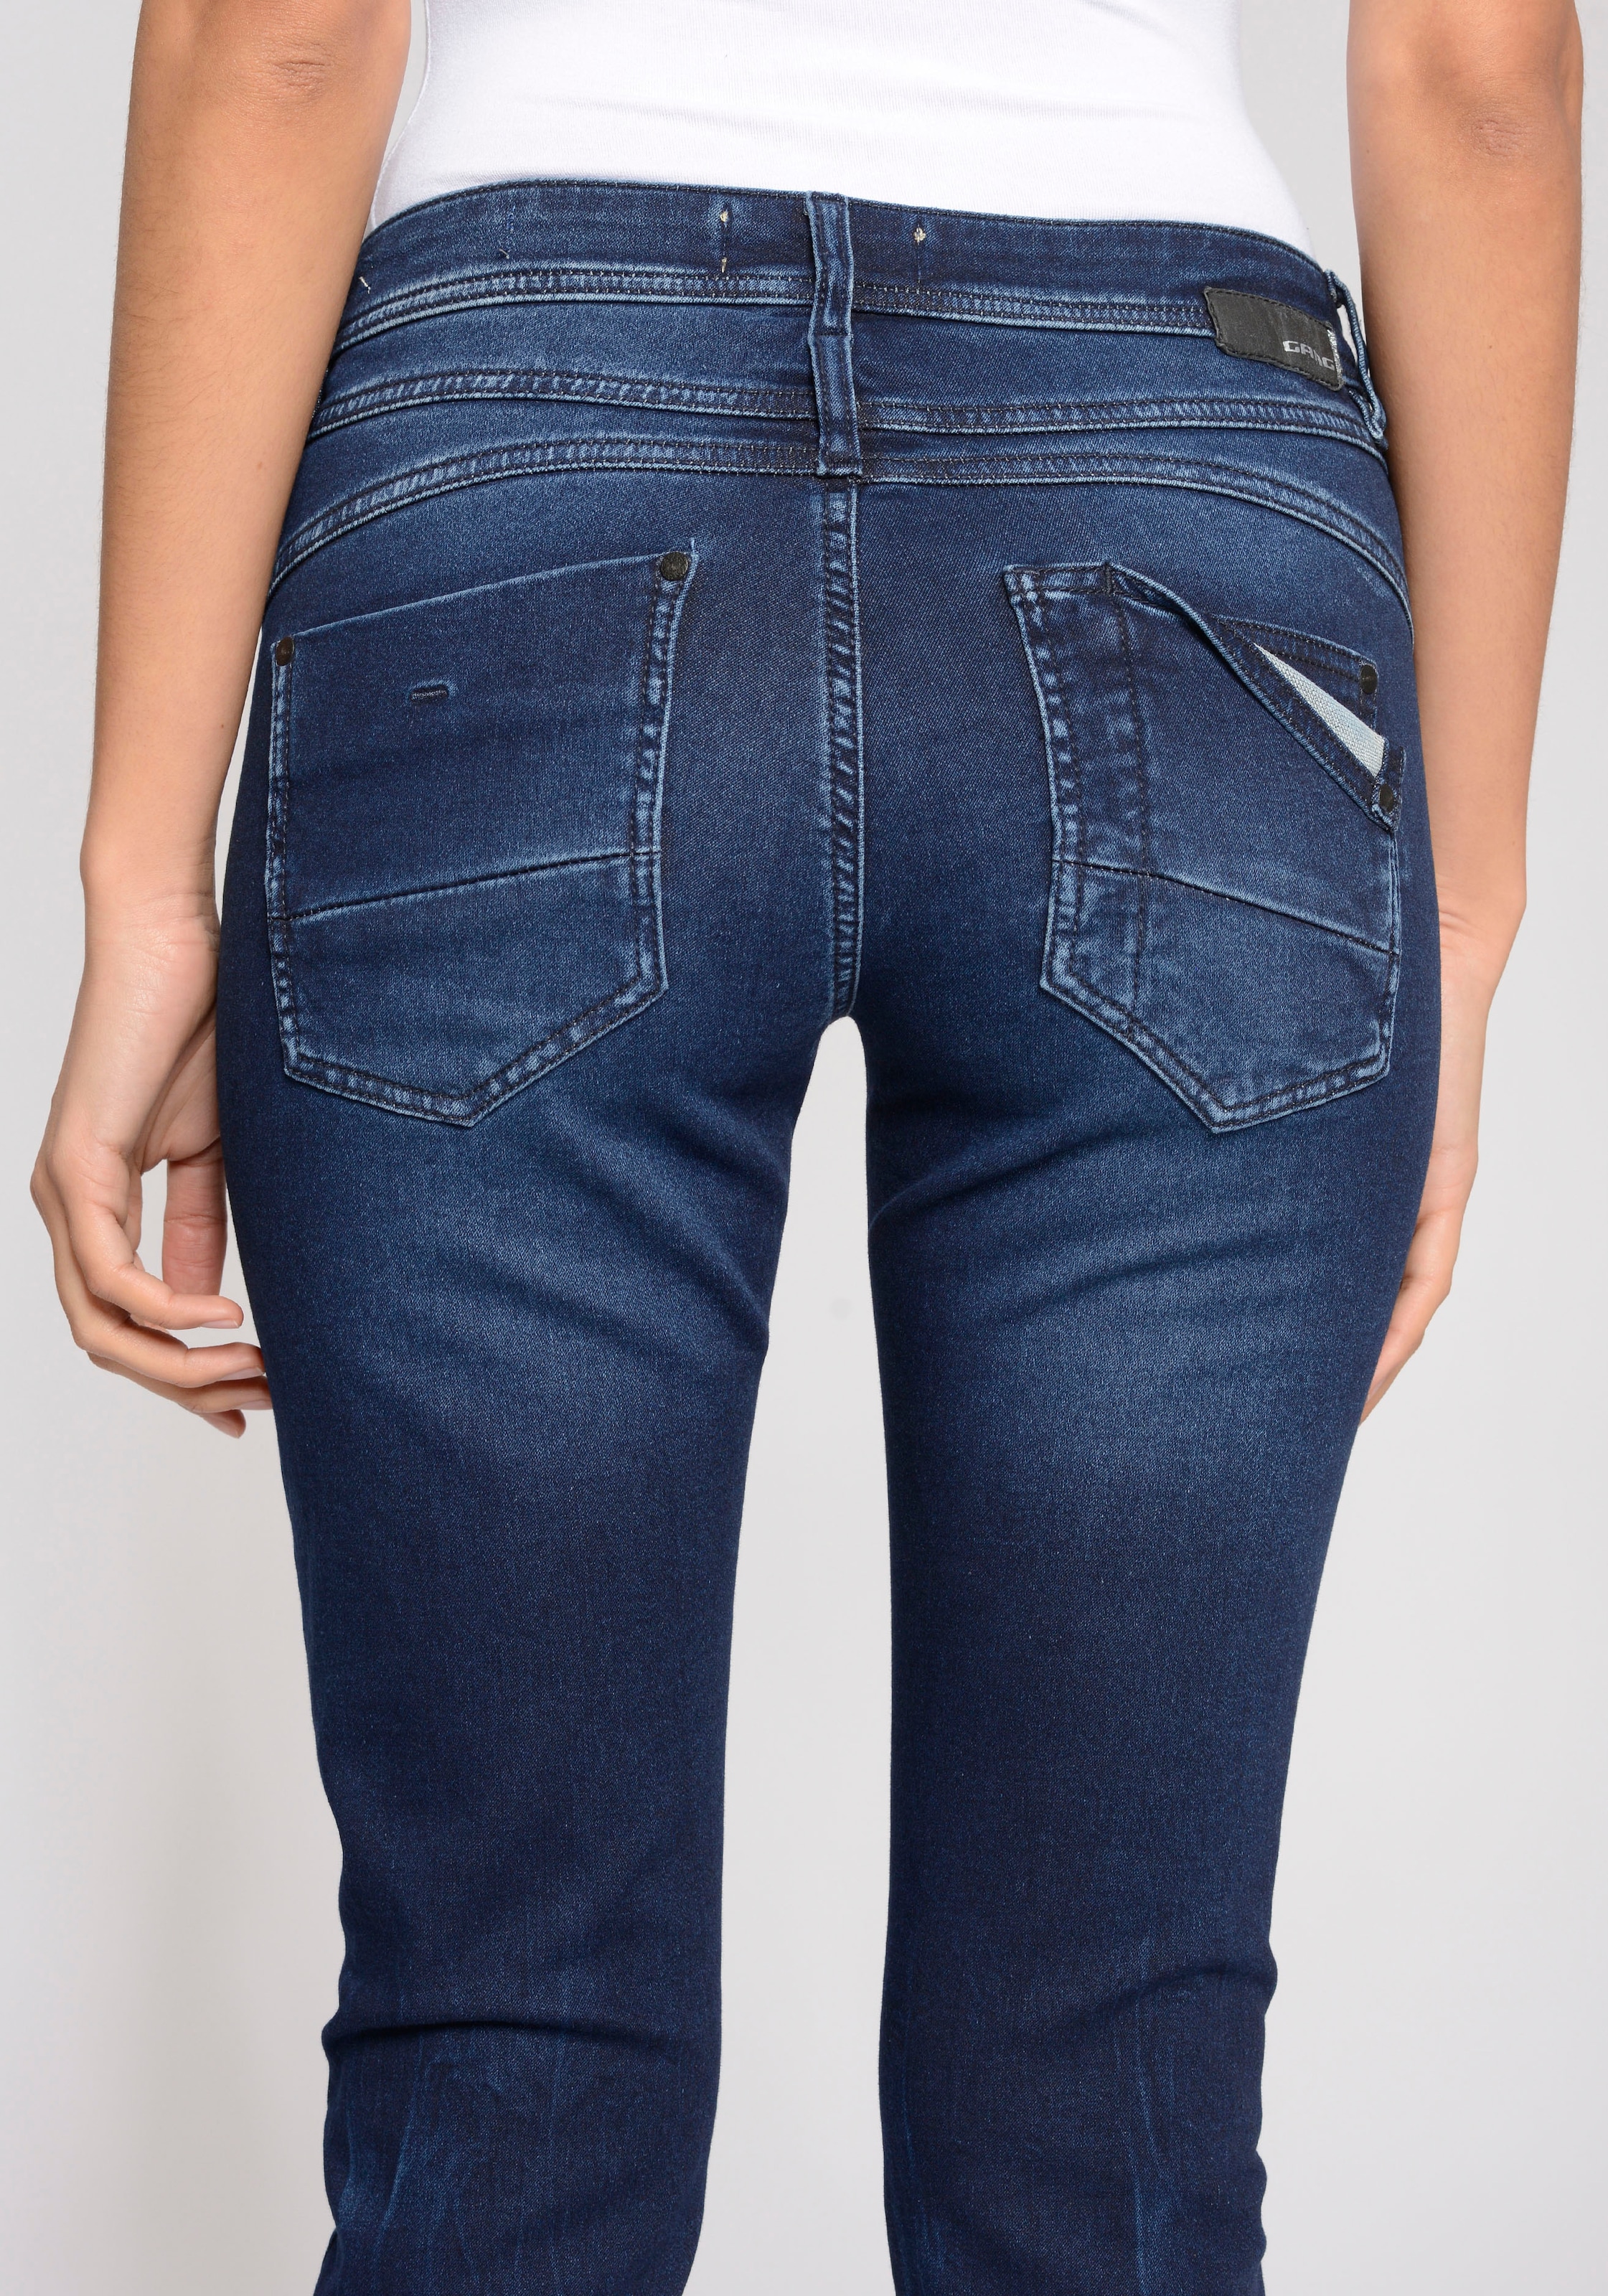 »94Amelie Relax-fit-Jeans OTTO kaufen Cropped« GANG bei